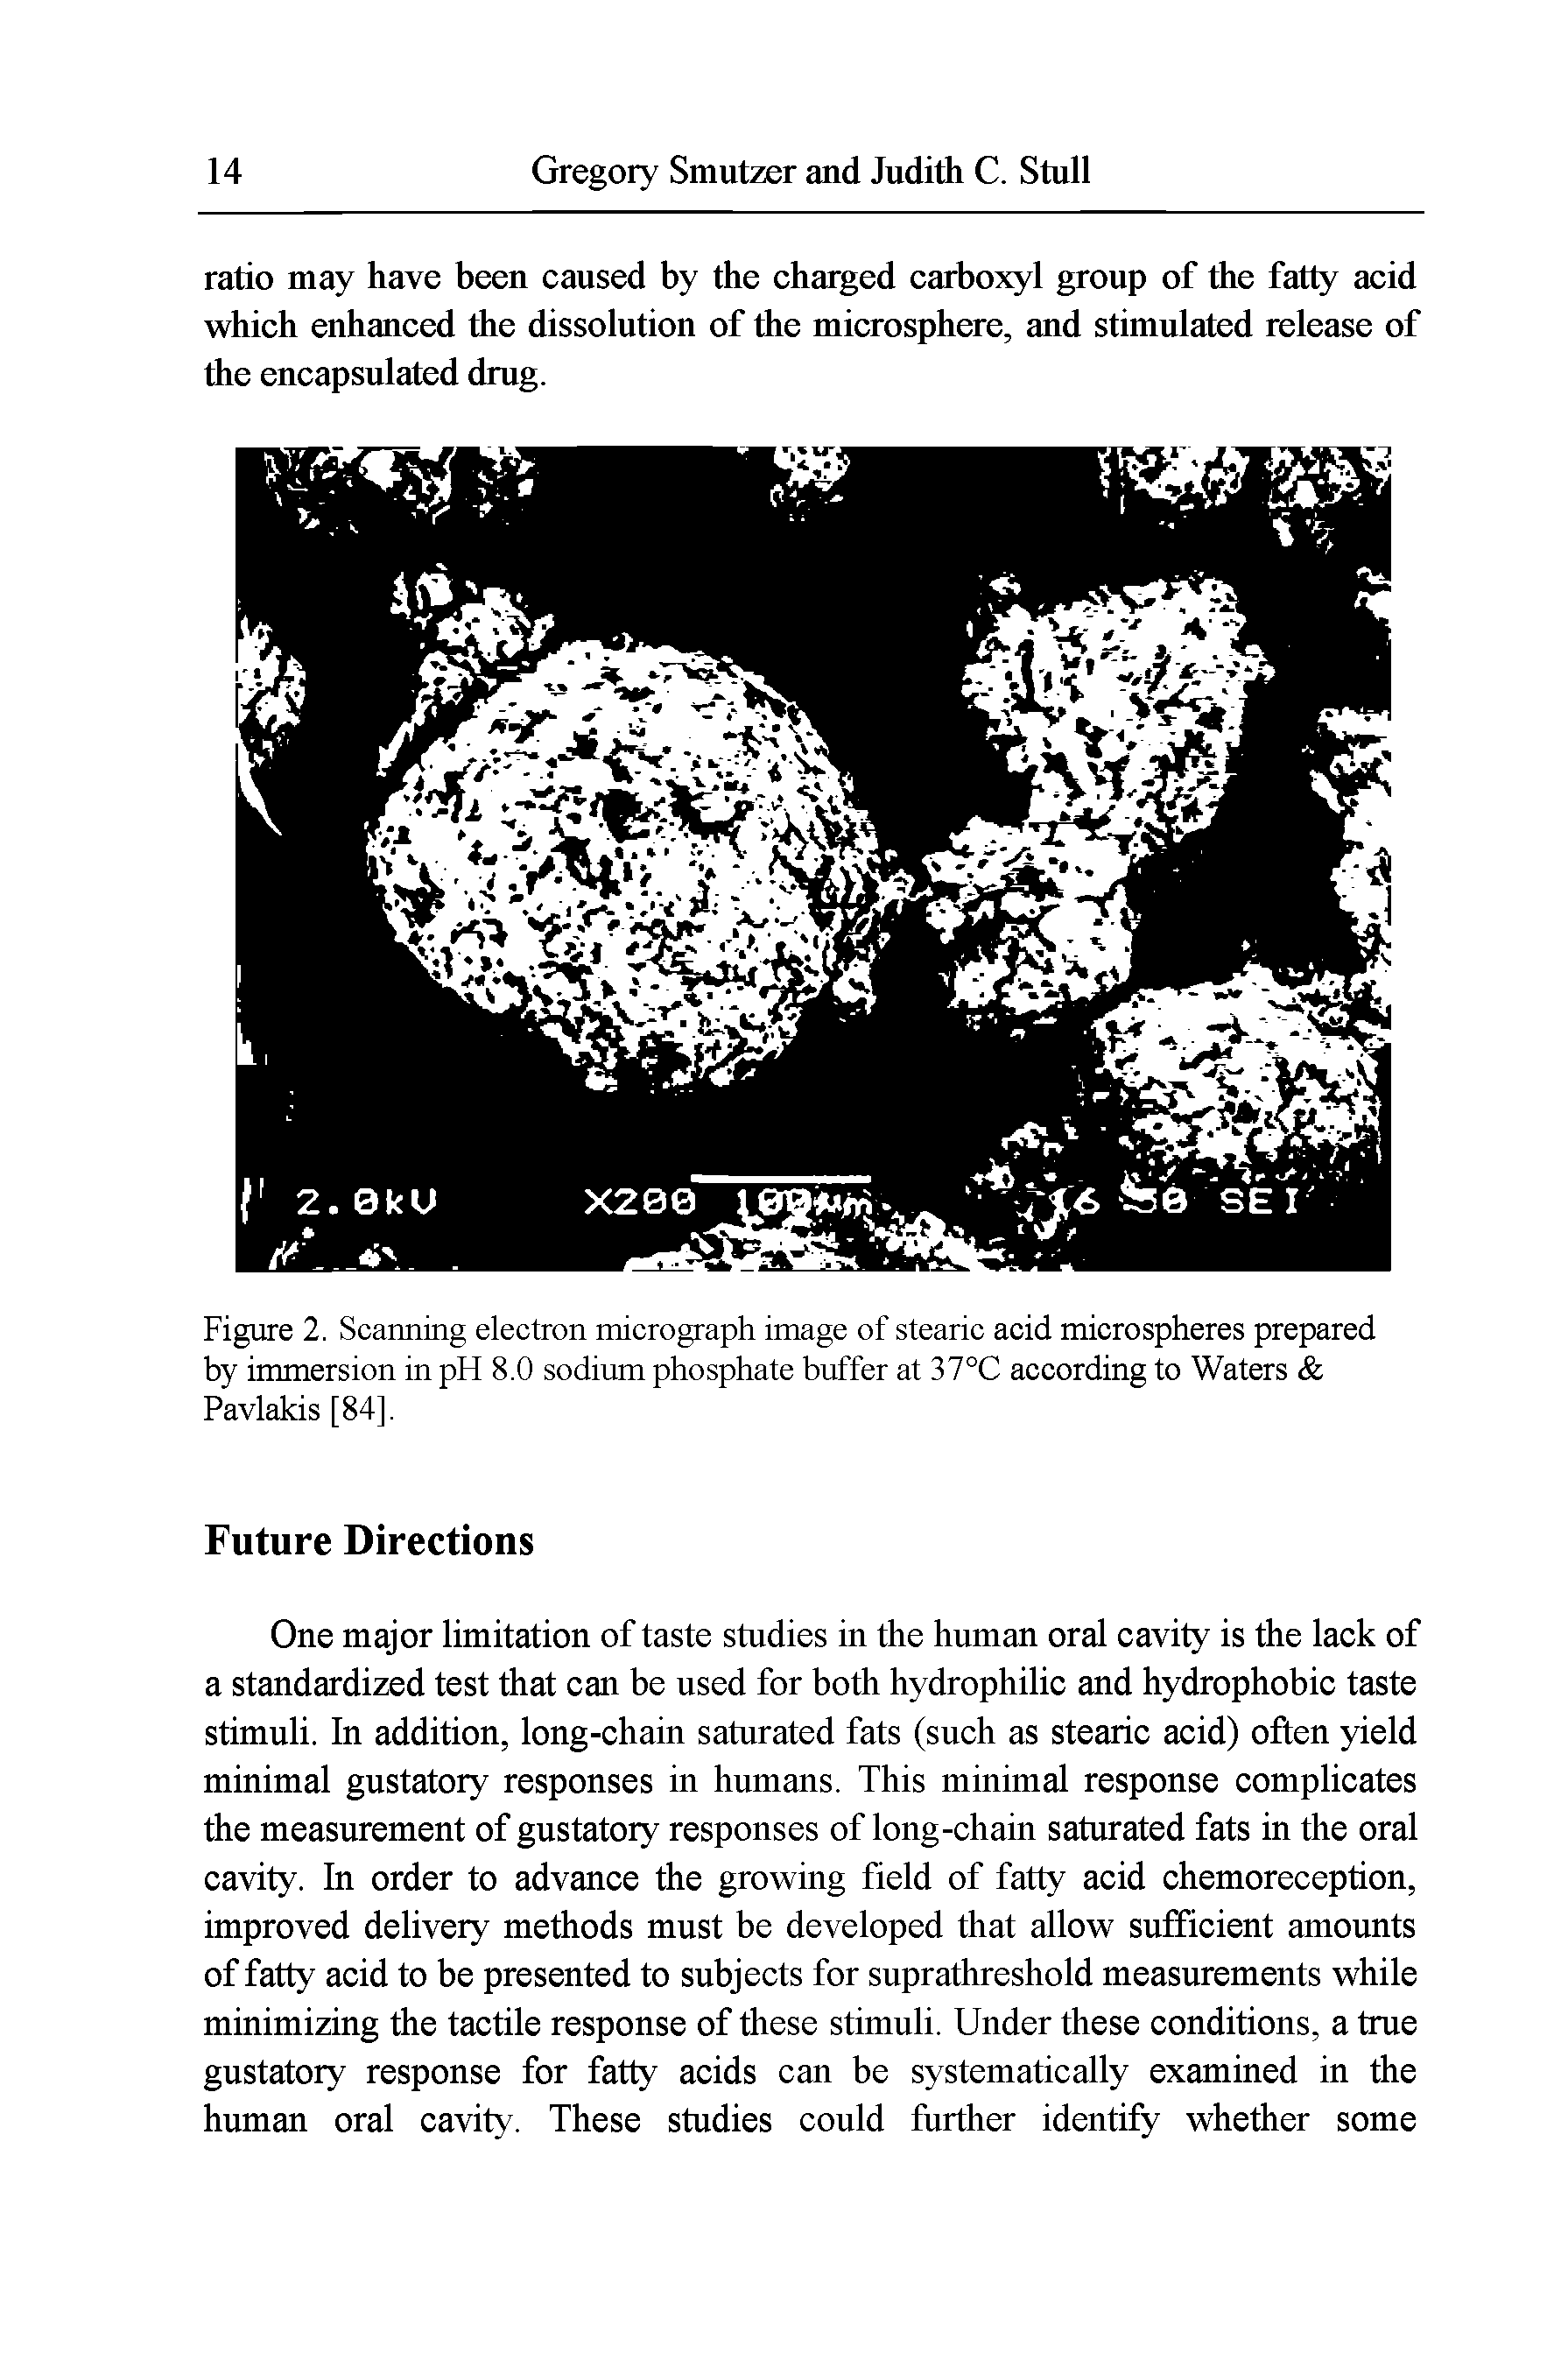 Figure 2. Scanning electron micrograph image of stearic acid microspheres prepared by immersion in pH 8.0 sodium phosphate buffer at 37°C according to Waters Pavlakis [84].